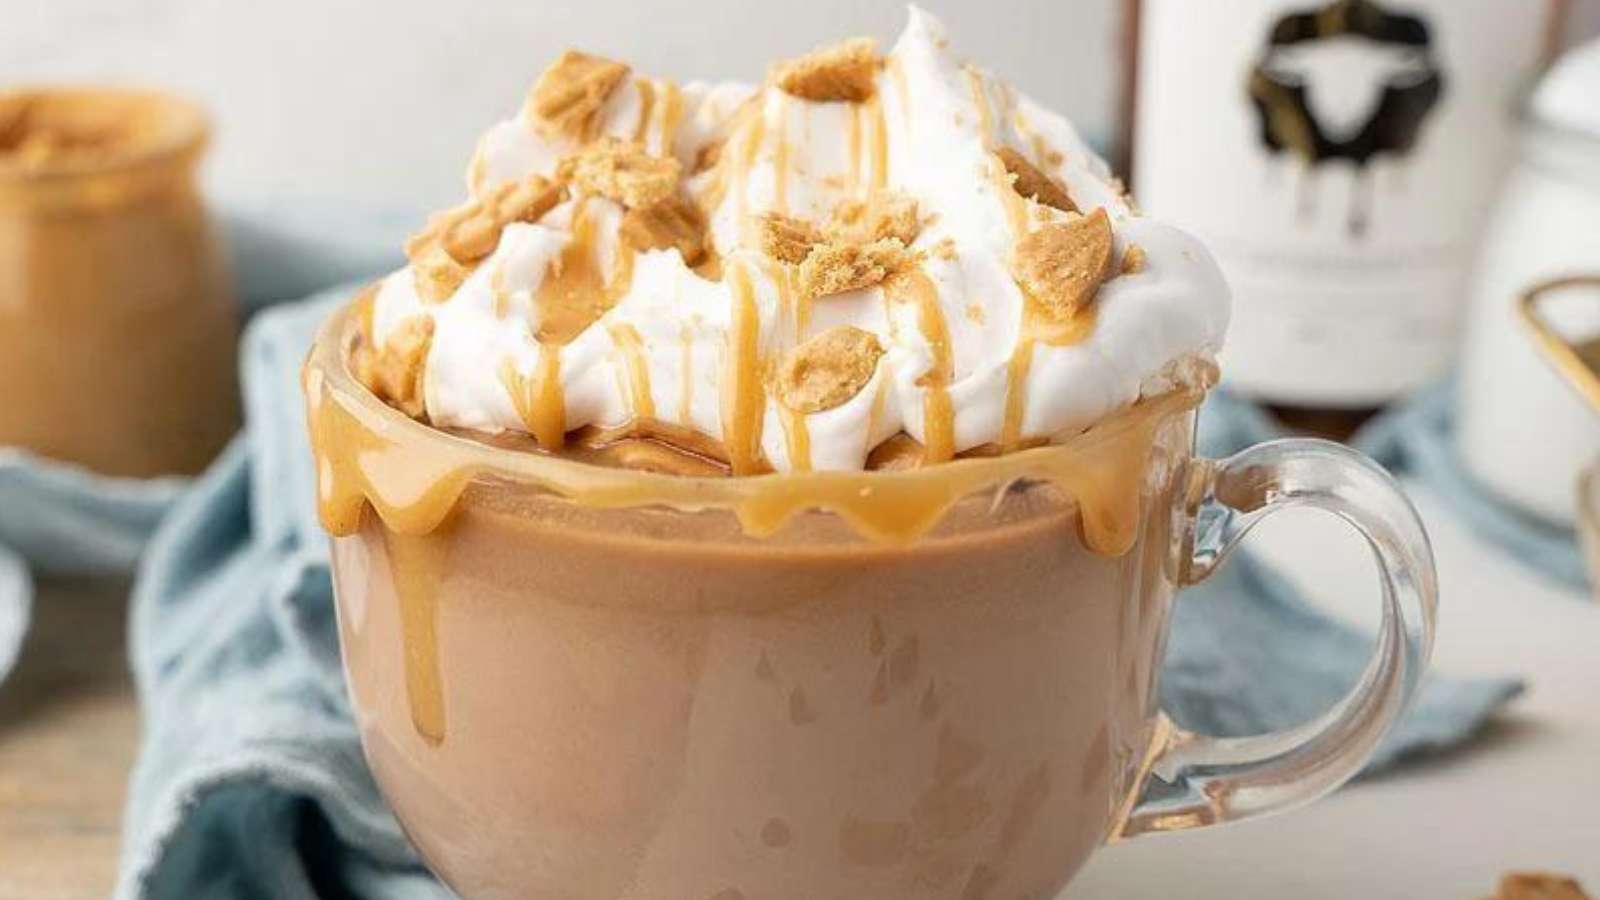 Salted Peanut Butter Hot Chocolate recipe by XoxoBella.